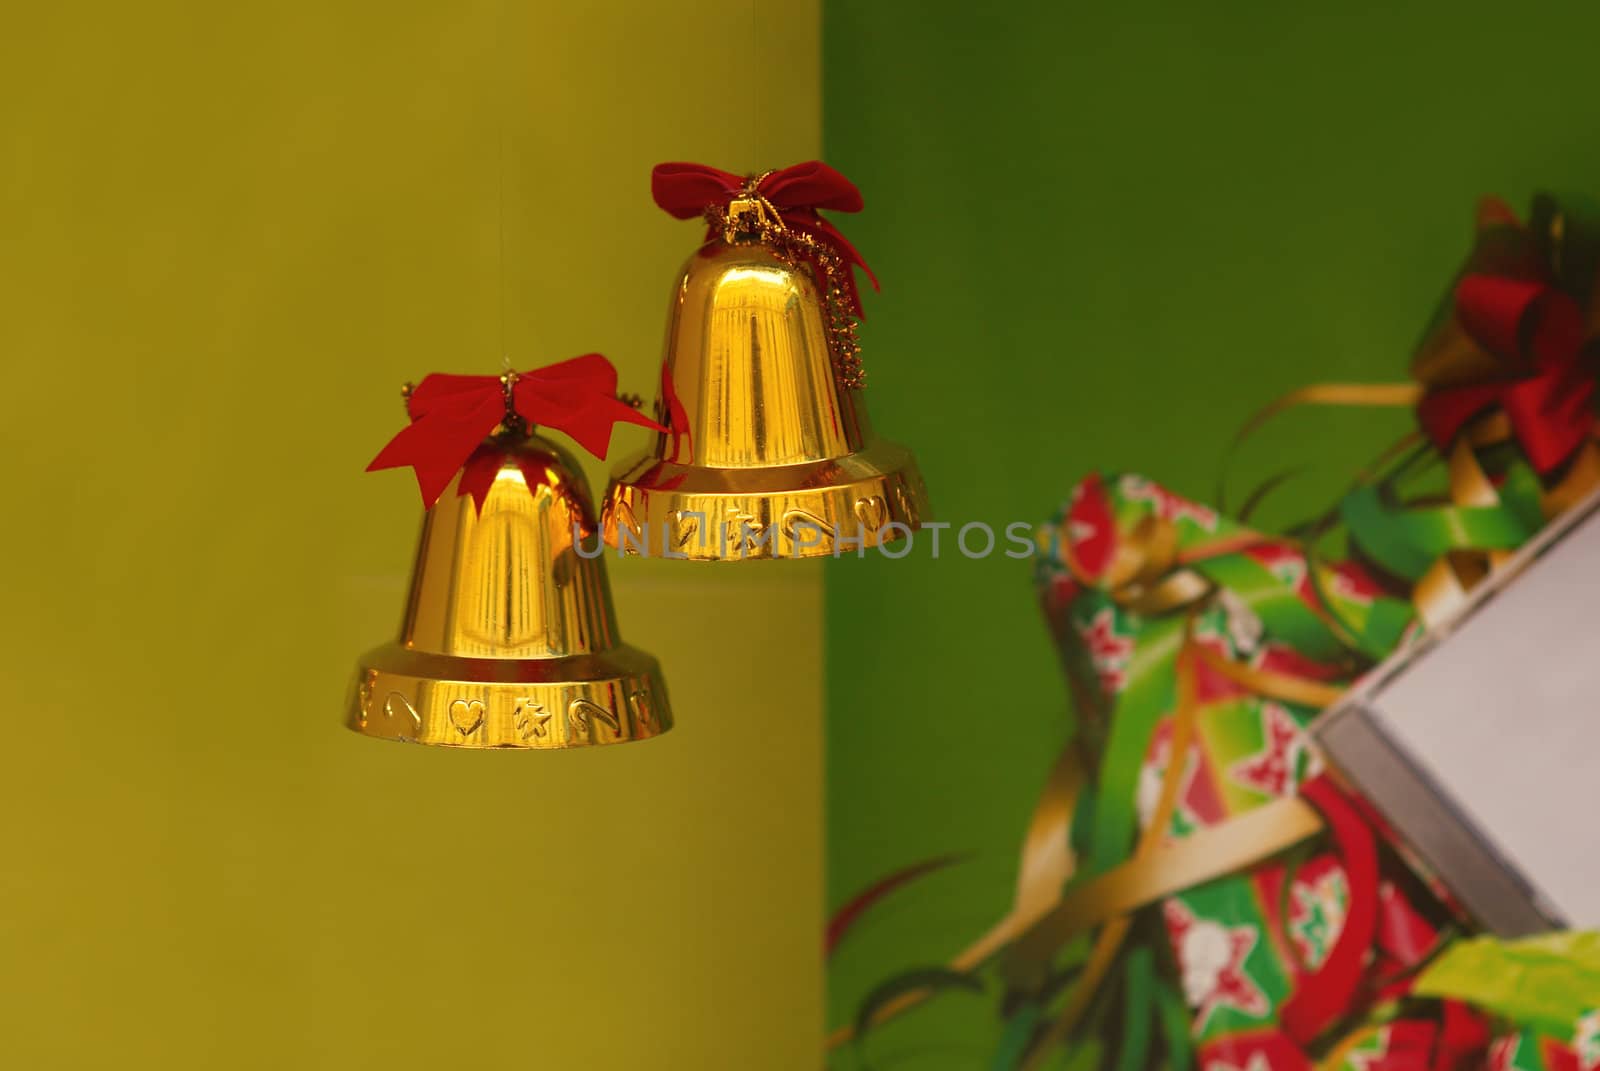 Photo of the New Year's decorative handbells located in a show-window